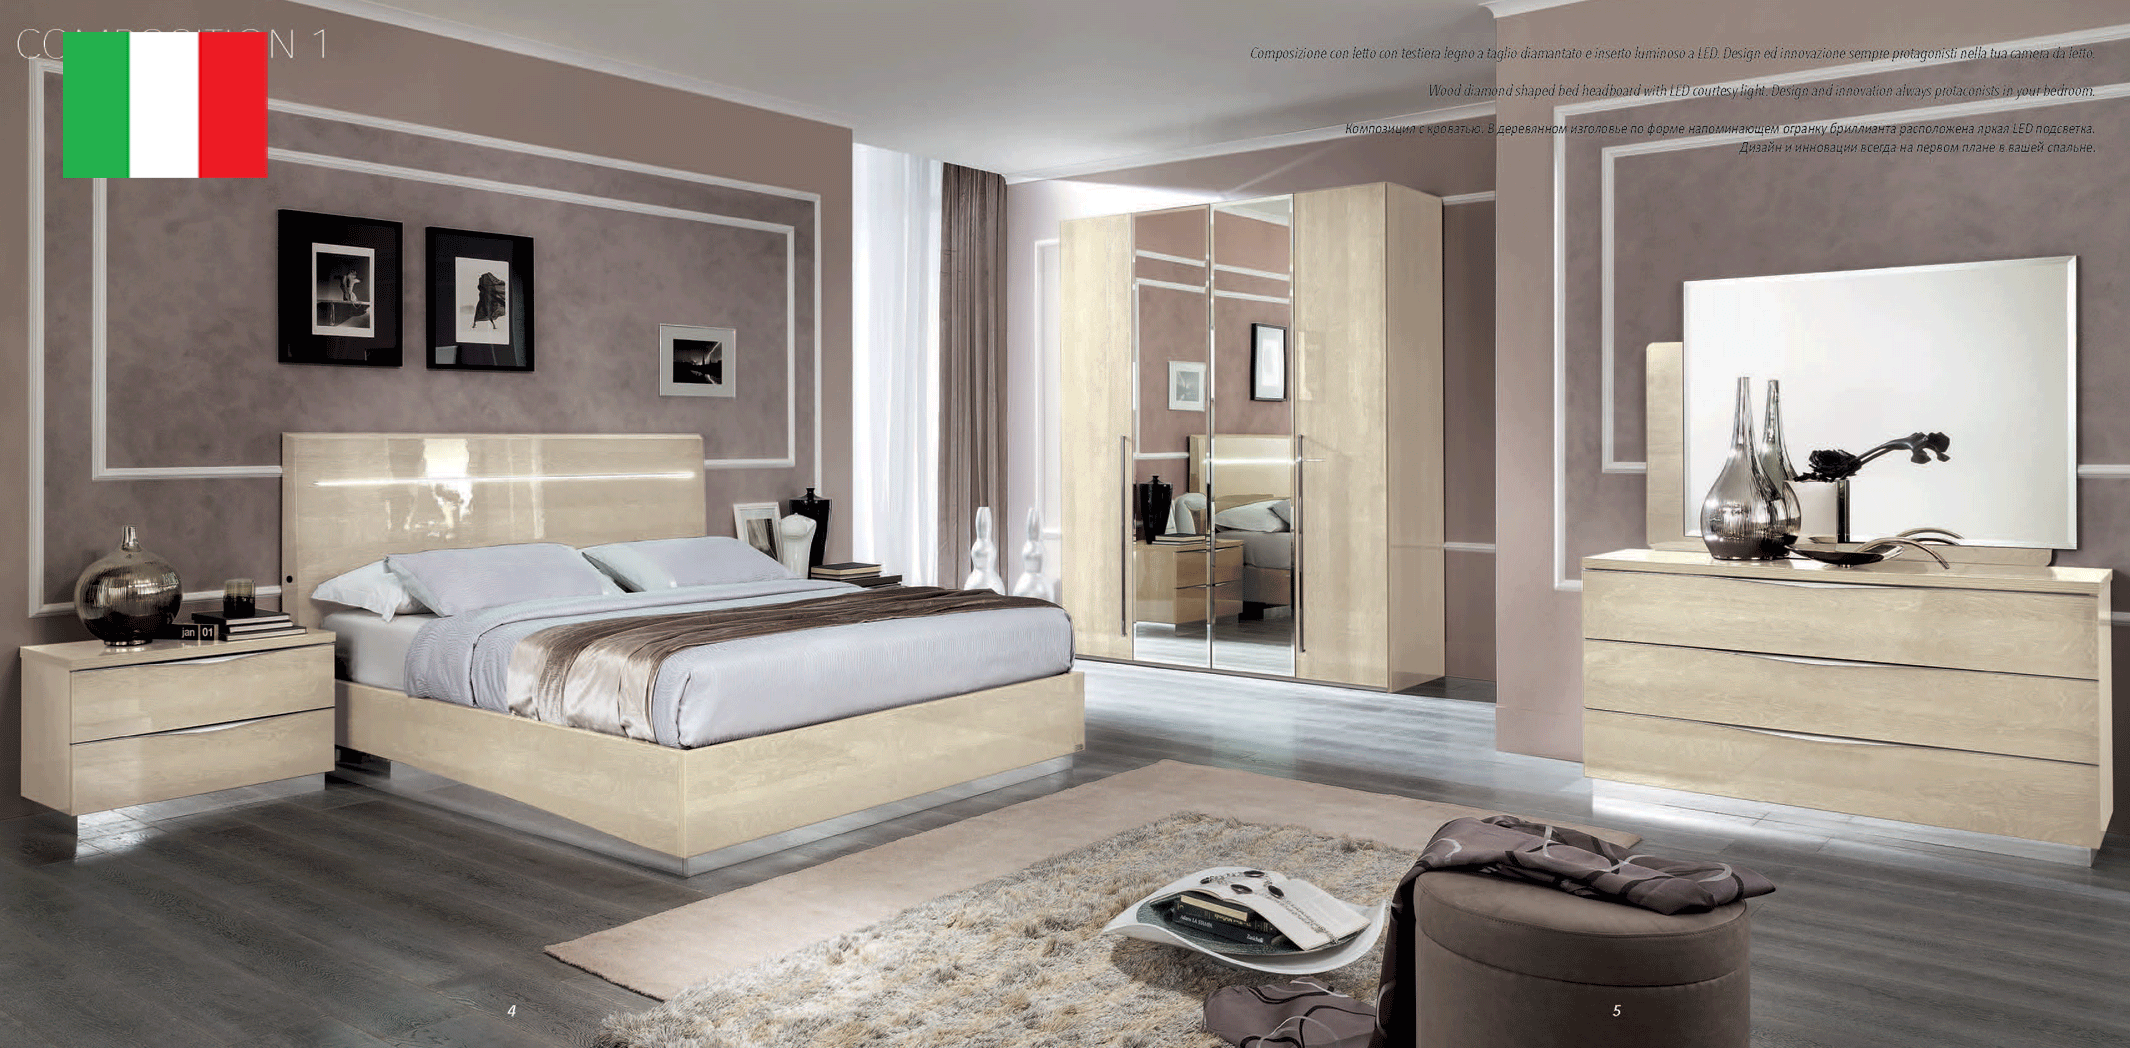 Bedroom Furniture Beds with storage Platinum Bedroom BETULLIA SABBIA by Camelgroup – Italy